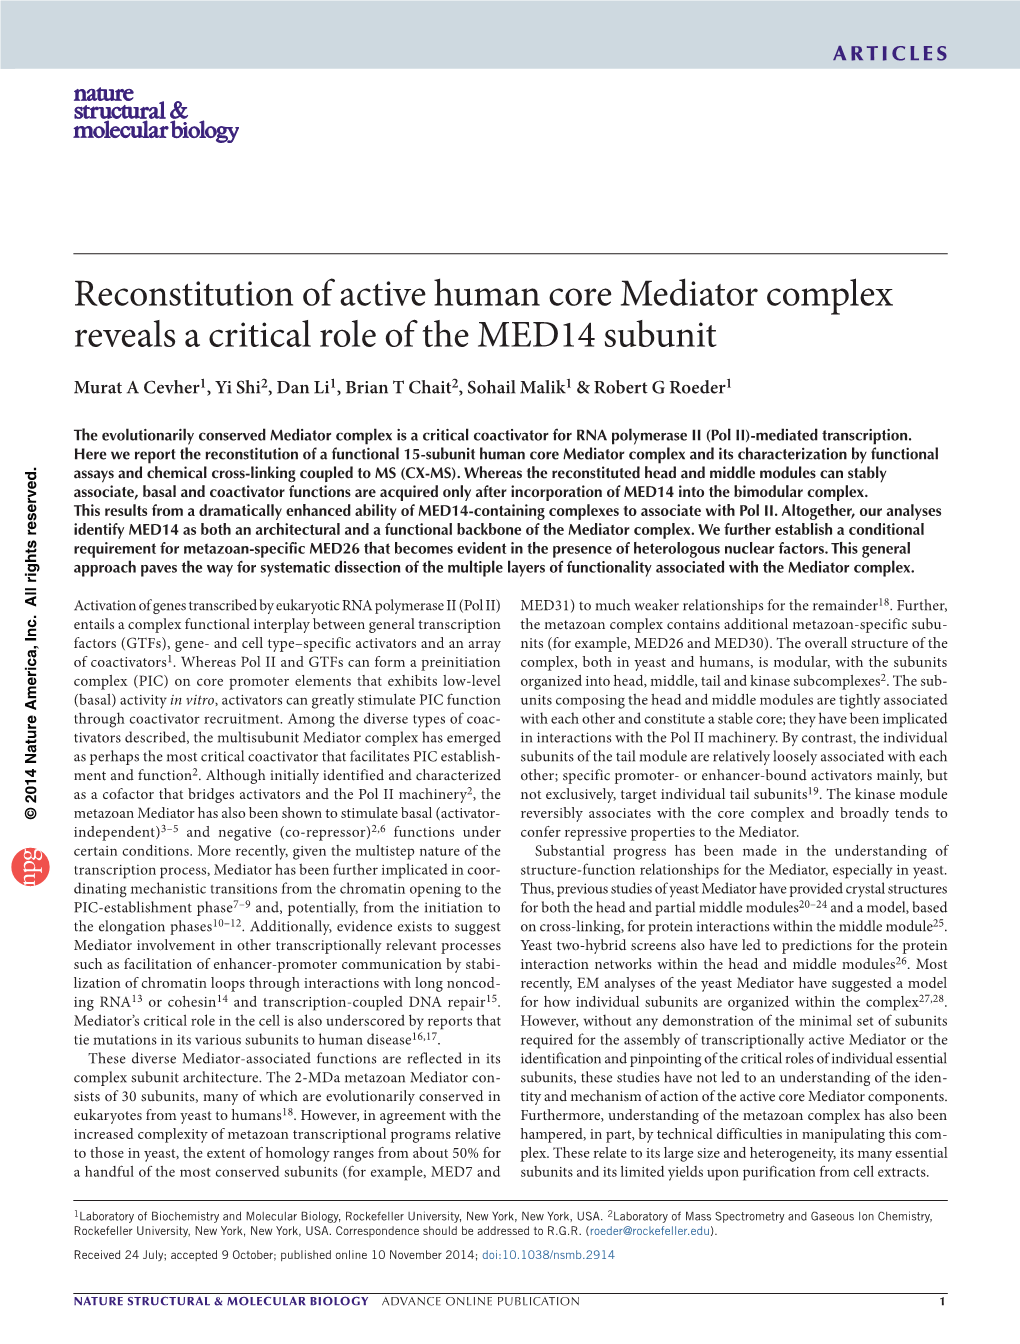 Reconstitution of Active Human Core Mediator Complex Reveals a Critical